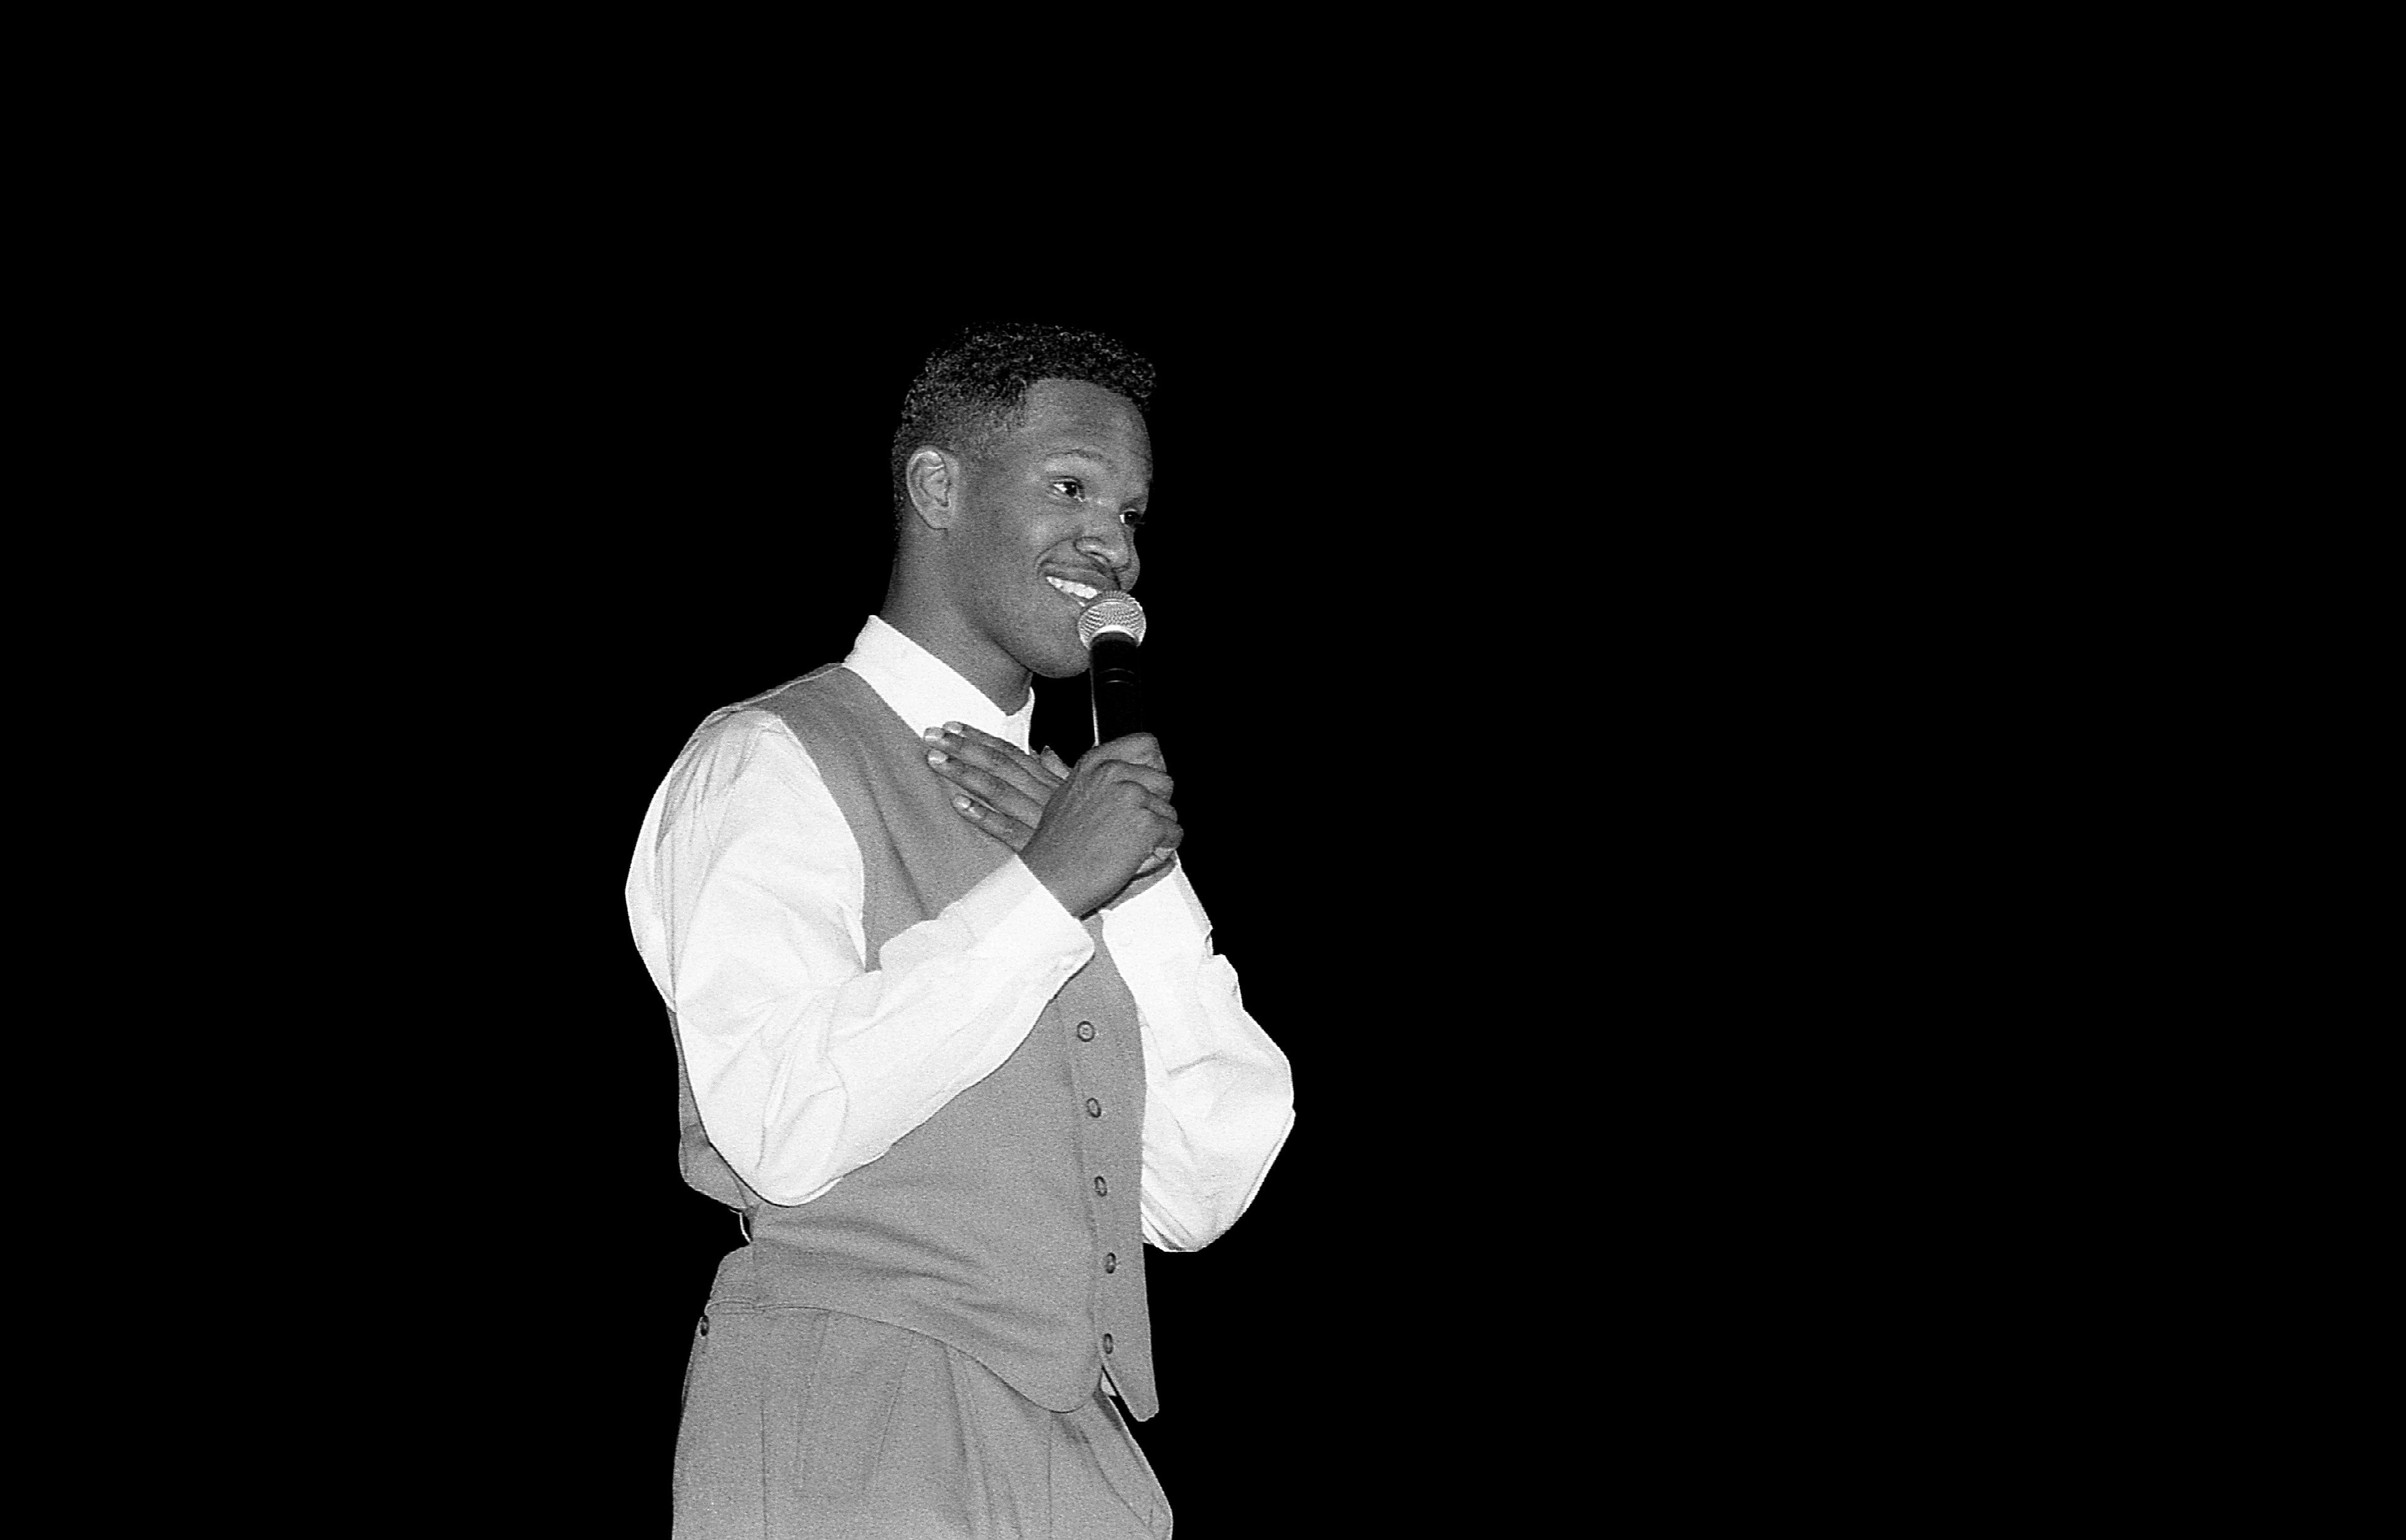 Jamie Foxx performing stand-up in April 1994, in Chicago, Illinois. | Source: Getty Images